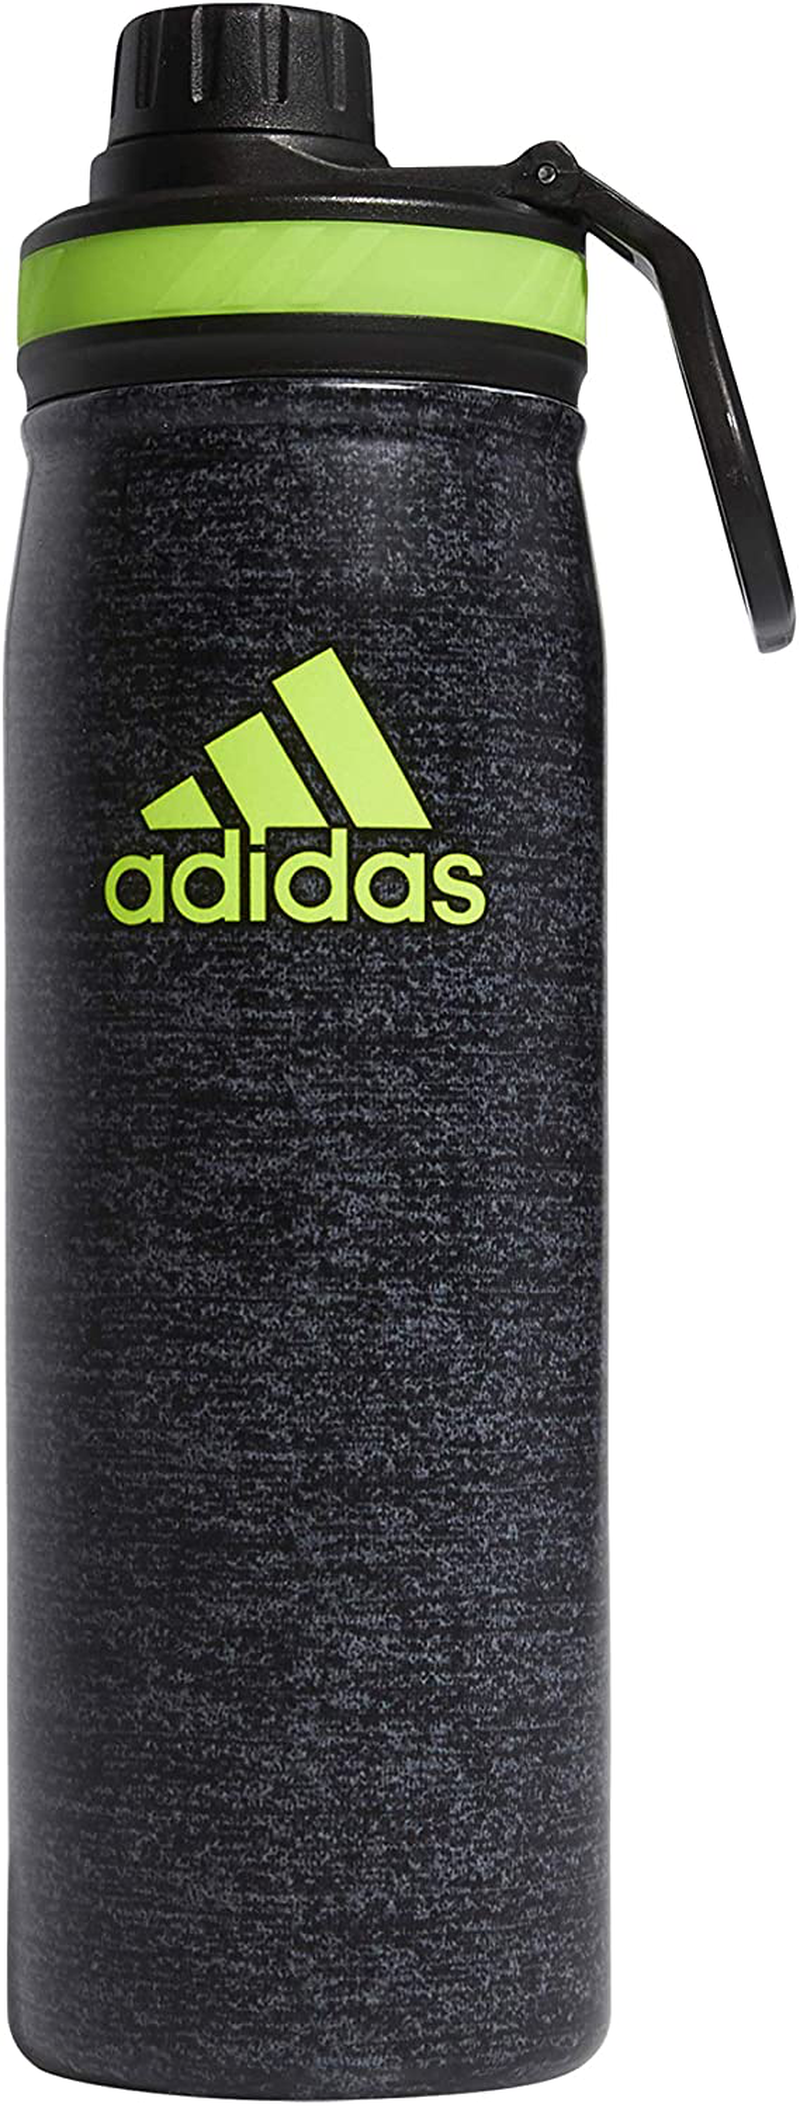 adidas 600 ML (20 oz) Metal Water Bottle, Hot/Cold Double-Walled Insulated 18/8 Stainless Steel